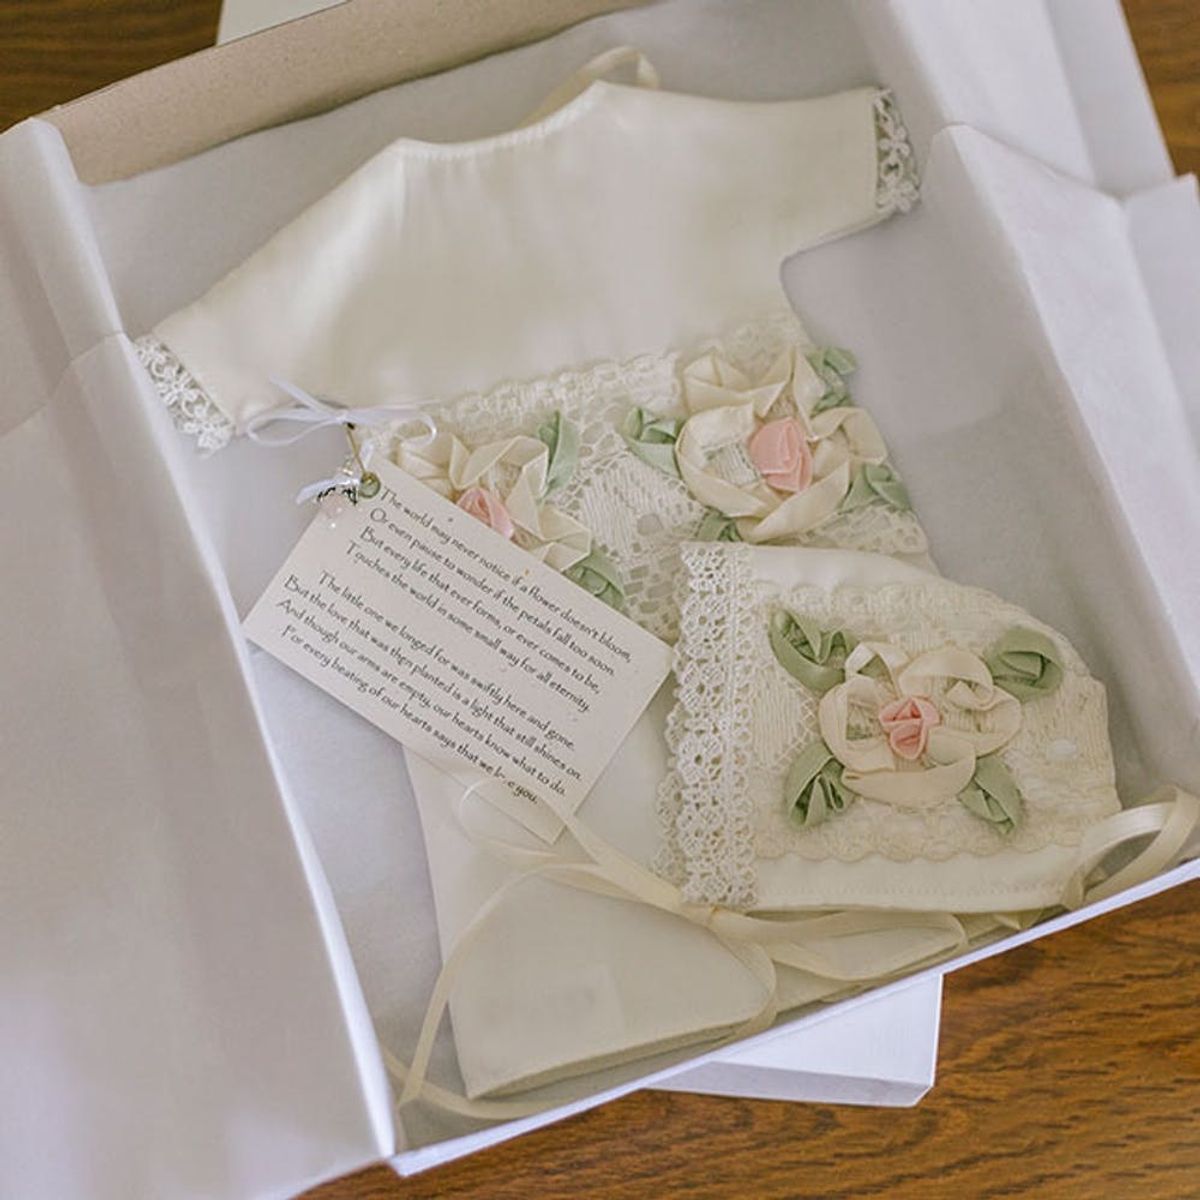 This Is the Most Heartwarming Way to Donate Your Wedding Dress